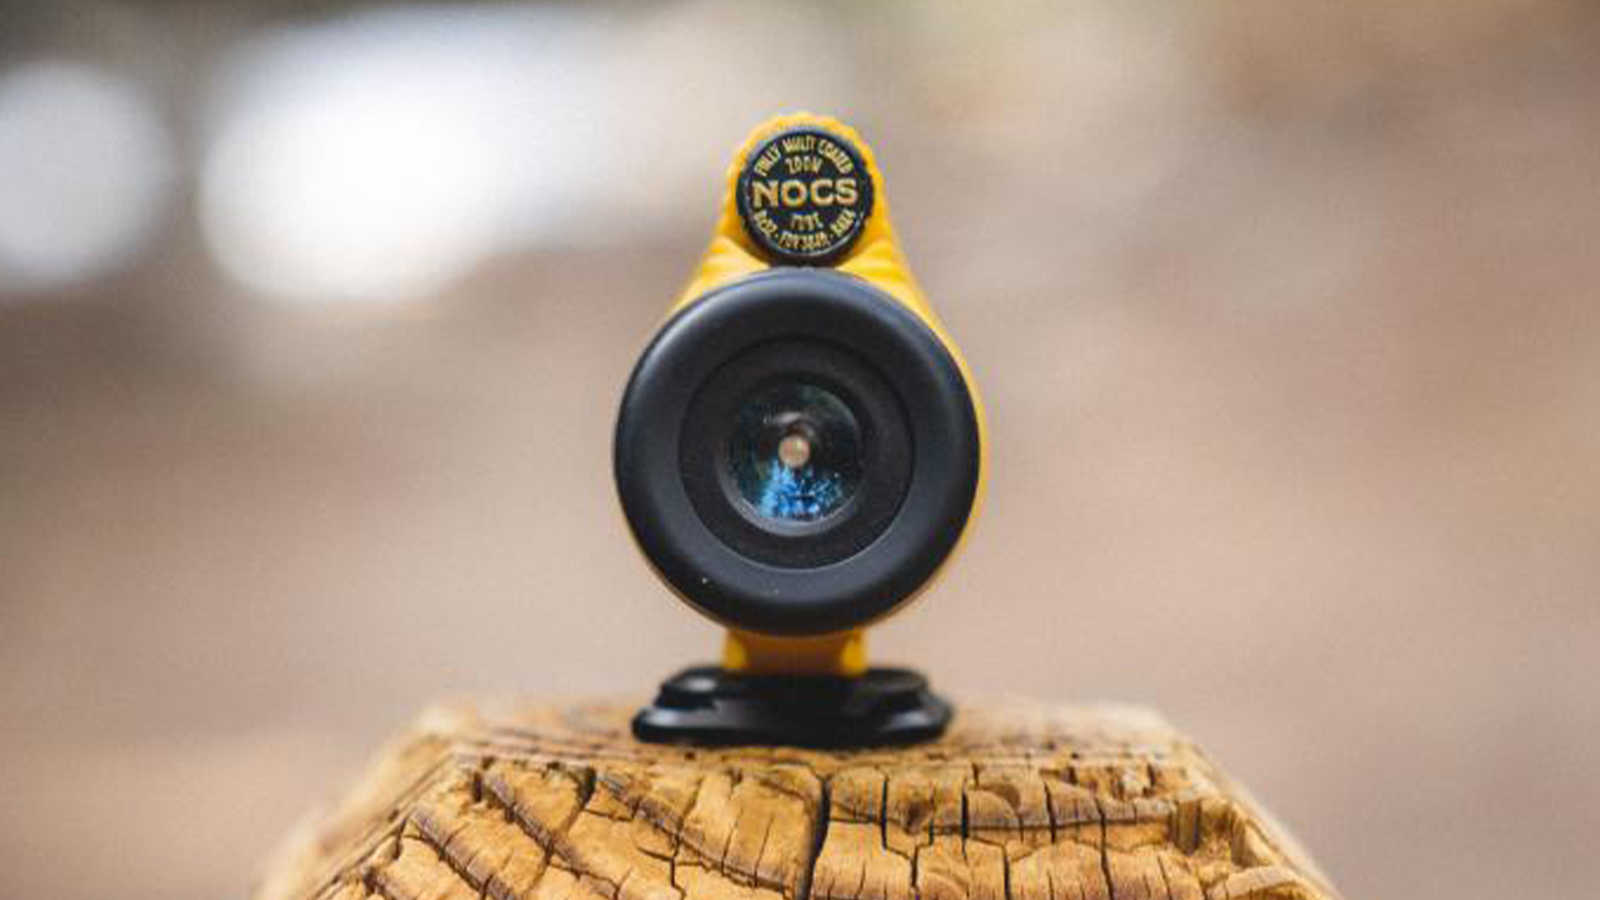 Nocs Provisions Introduces The Zoom Tube Monocular - IMBOLDN Nocs Zoom Tube Monocular Telescope